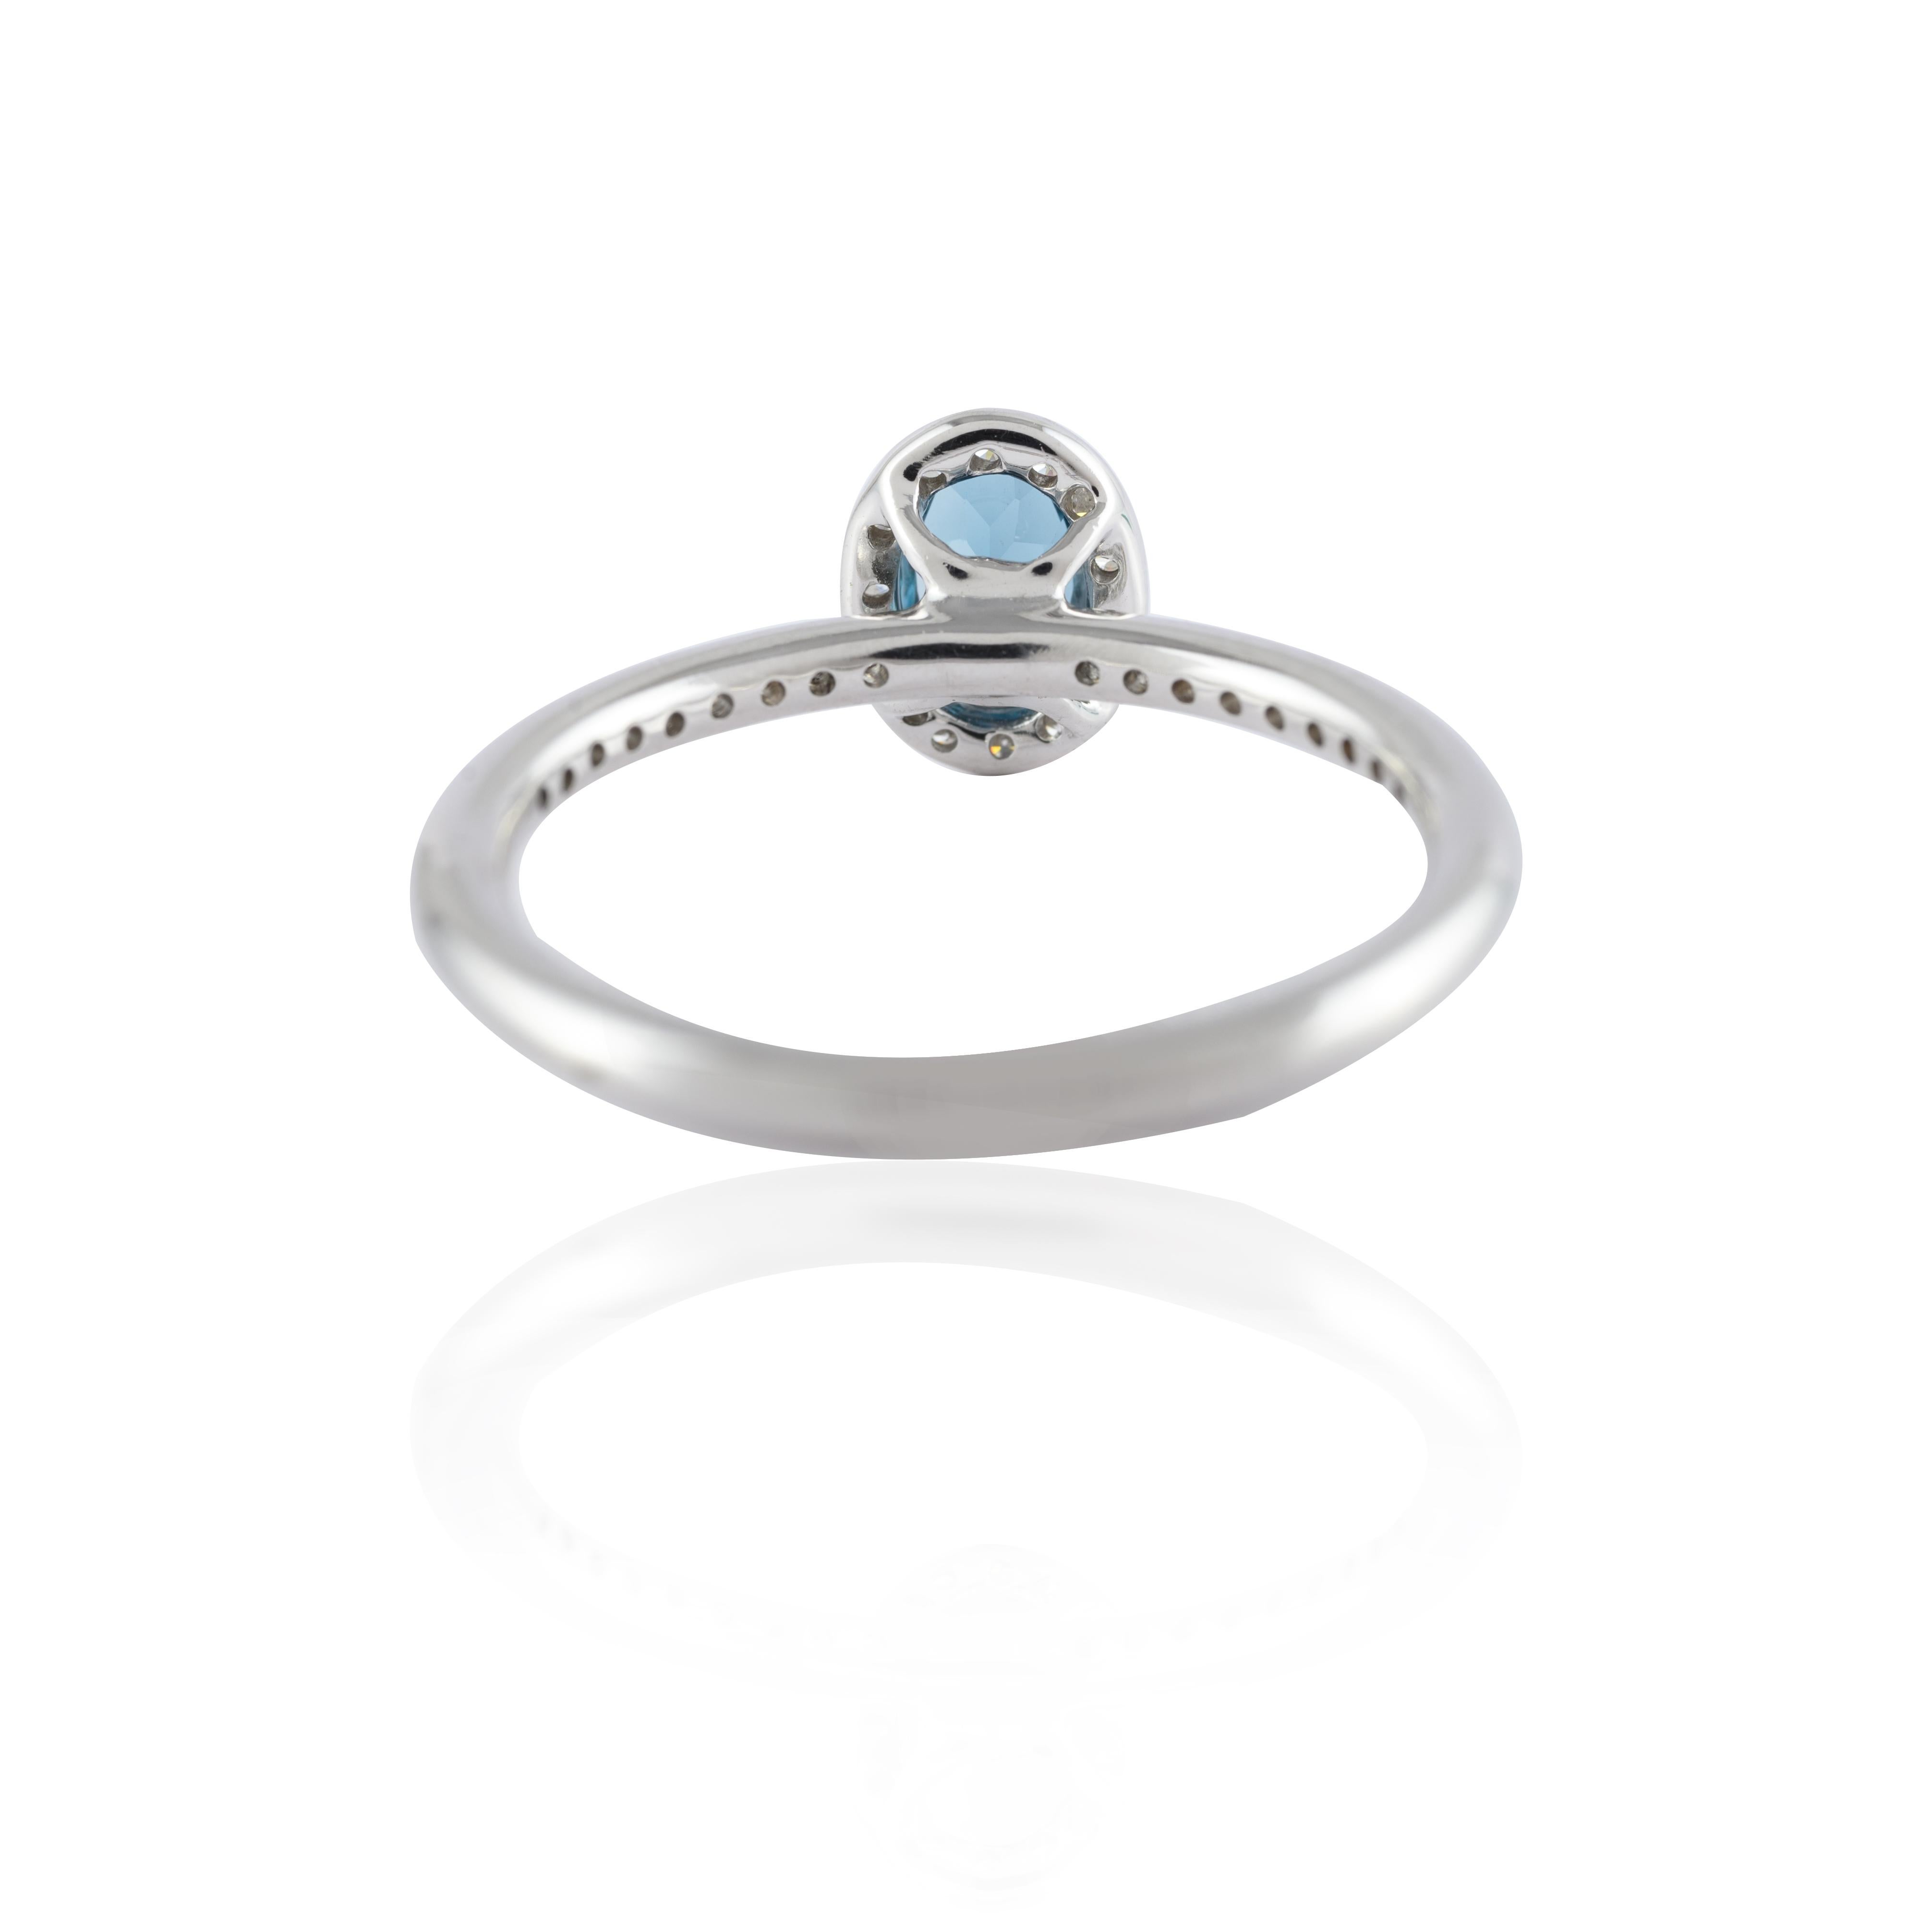 For Sale:  Natural 5.84 ct Blue Topaz and Halo Diamond Classic Ring in 14 Karat White Gold 6